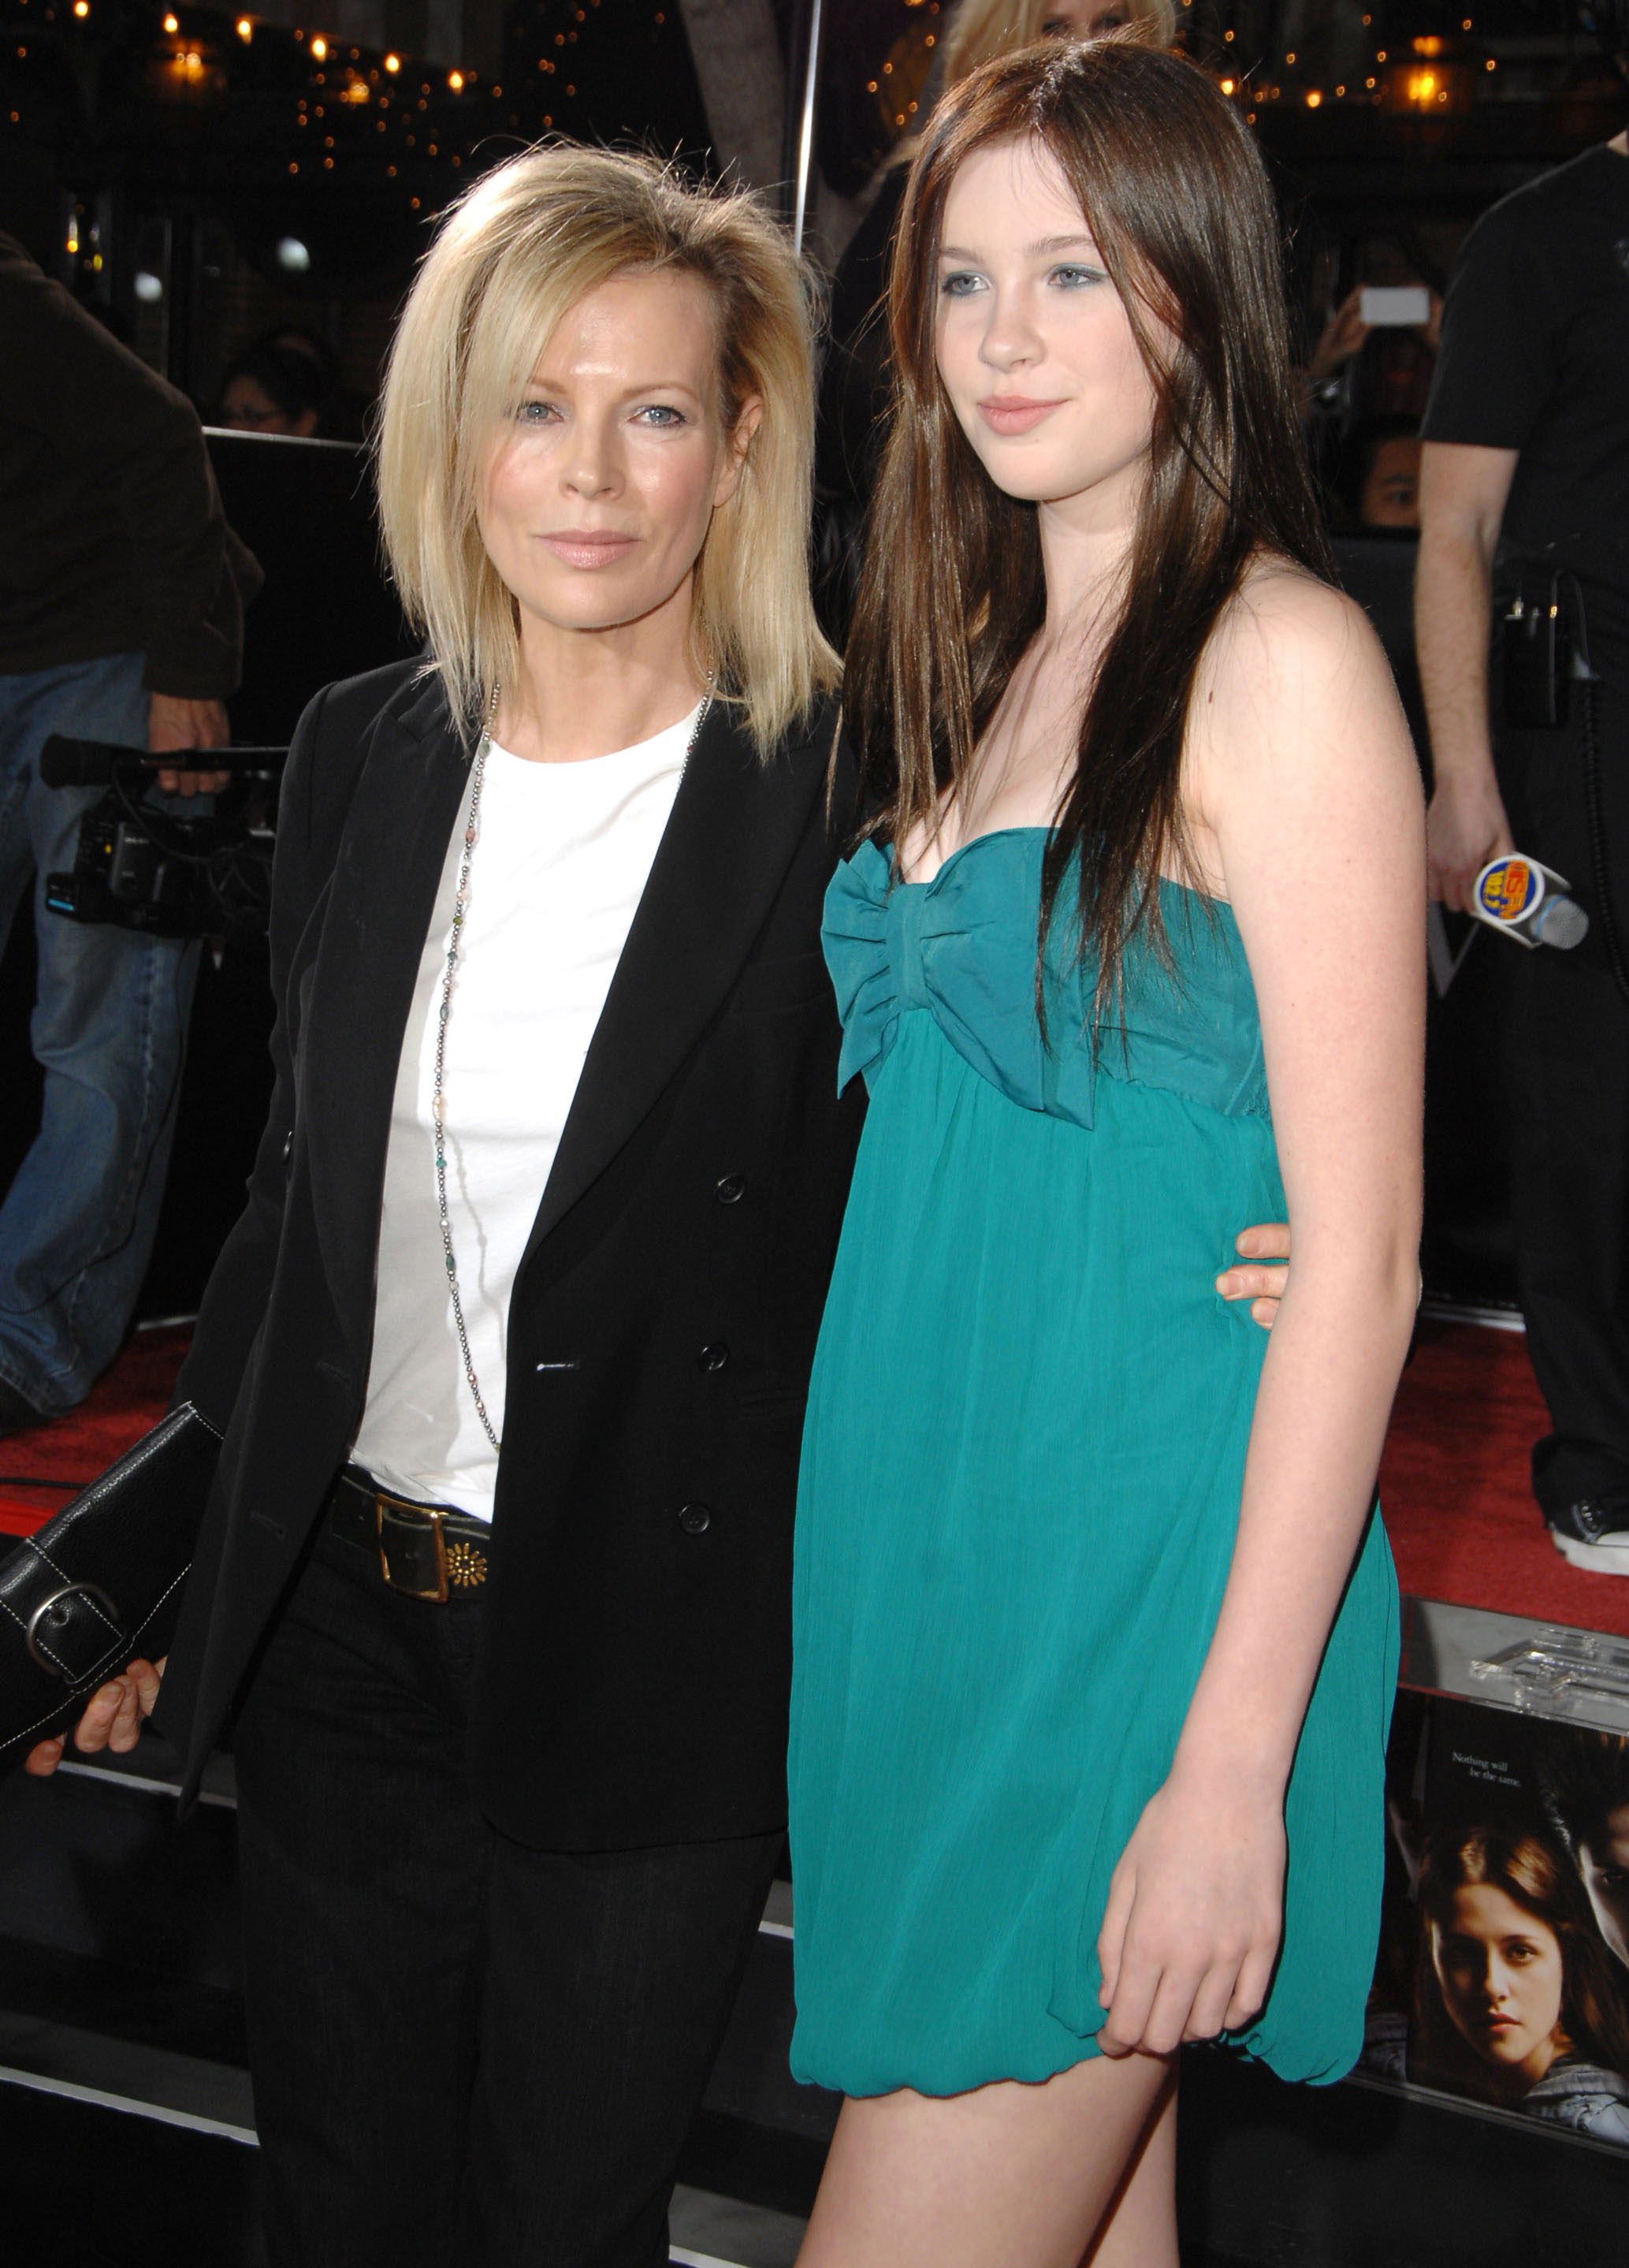 Kim Basinger and Ireland Baldwin arrive at the Los Angeles premiere of "Twilight" at the Mann Village and Bruin Theaters on November 17, 2008 in Westwood, California | Source: Getty Images